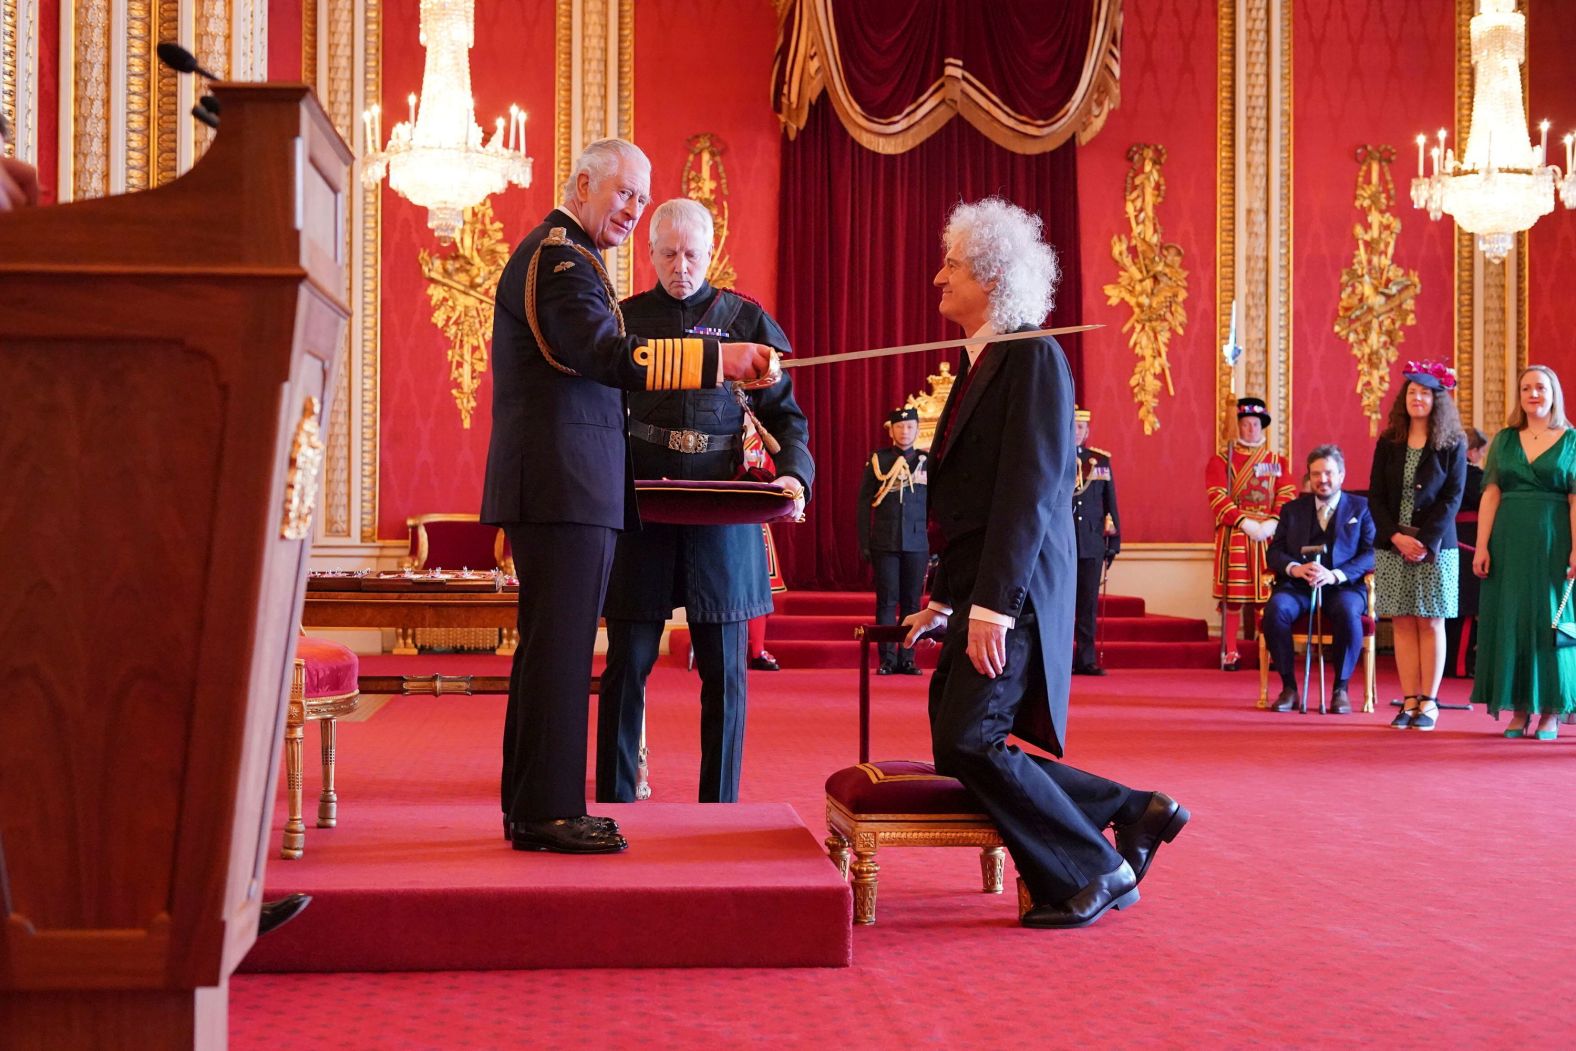 Rock Guitarist Brian May is made a Knight Bachelor by King Charles III at Buckingham Palace in London on Tuesday, March 14. The founding member of the band <a href="index.php?page=&url=https%3A%2F%2Fwww.cnn.com%2Finteractive%2F2018%2F11%2Fopinions%2Fqueen-live-aid-cnnphotos%2F" target="_blank">Queen</a> will now be known as Sir Brian, following the investiture ceremony.